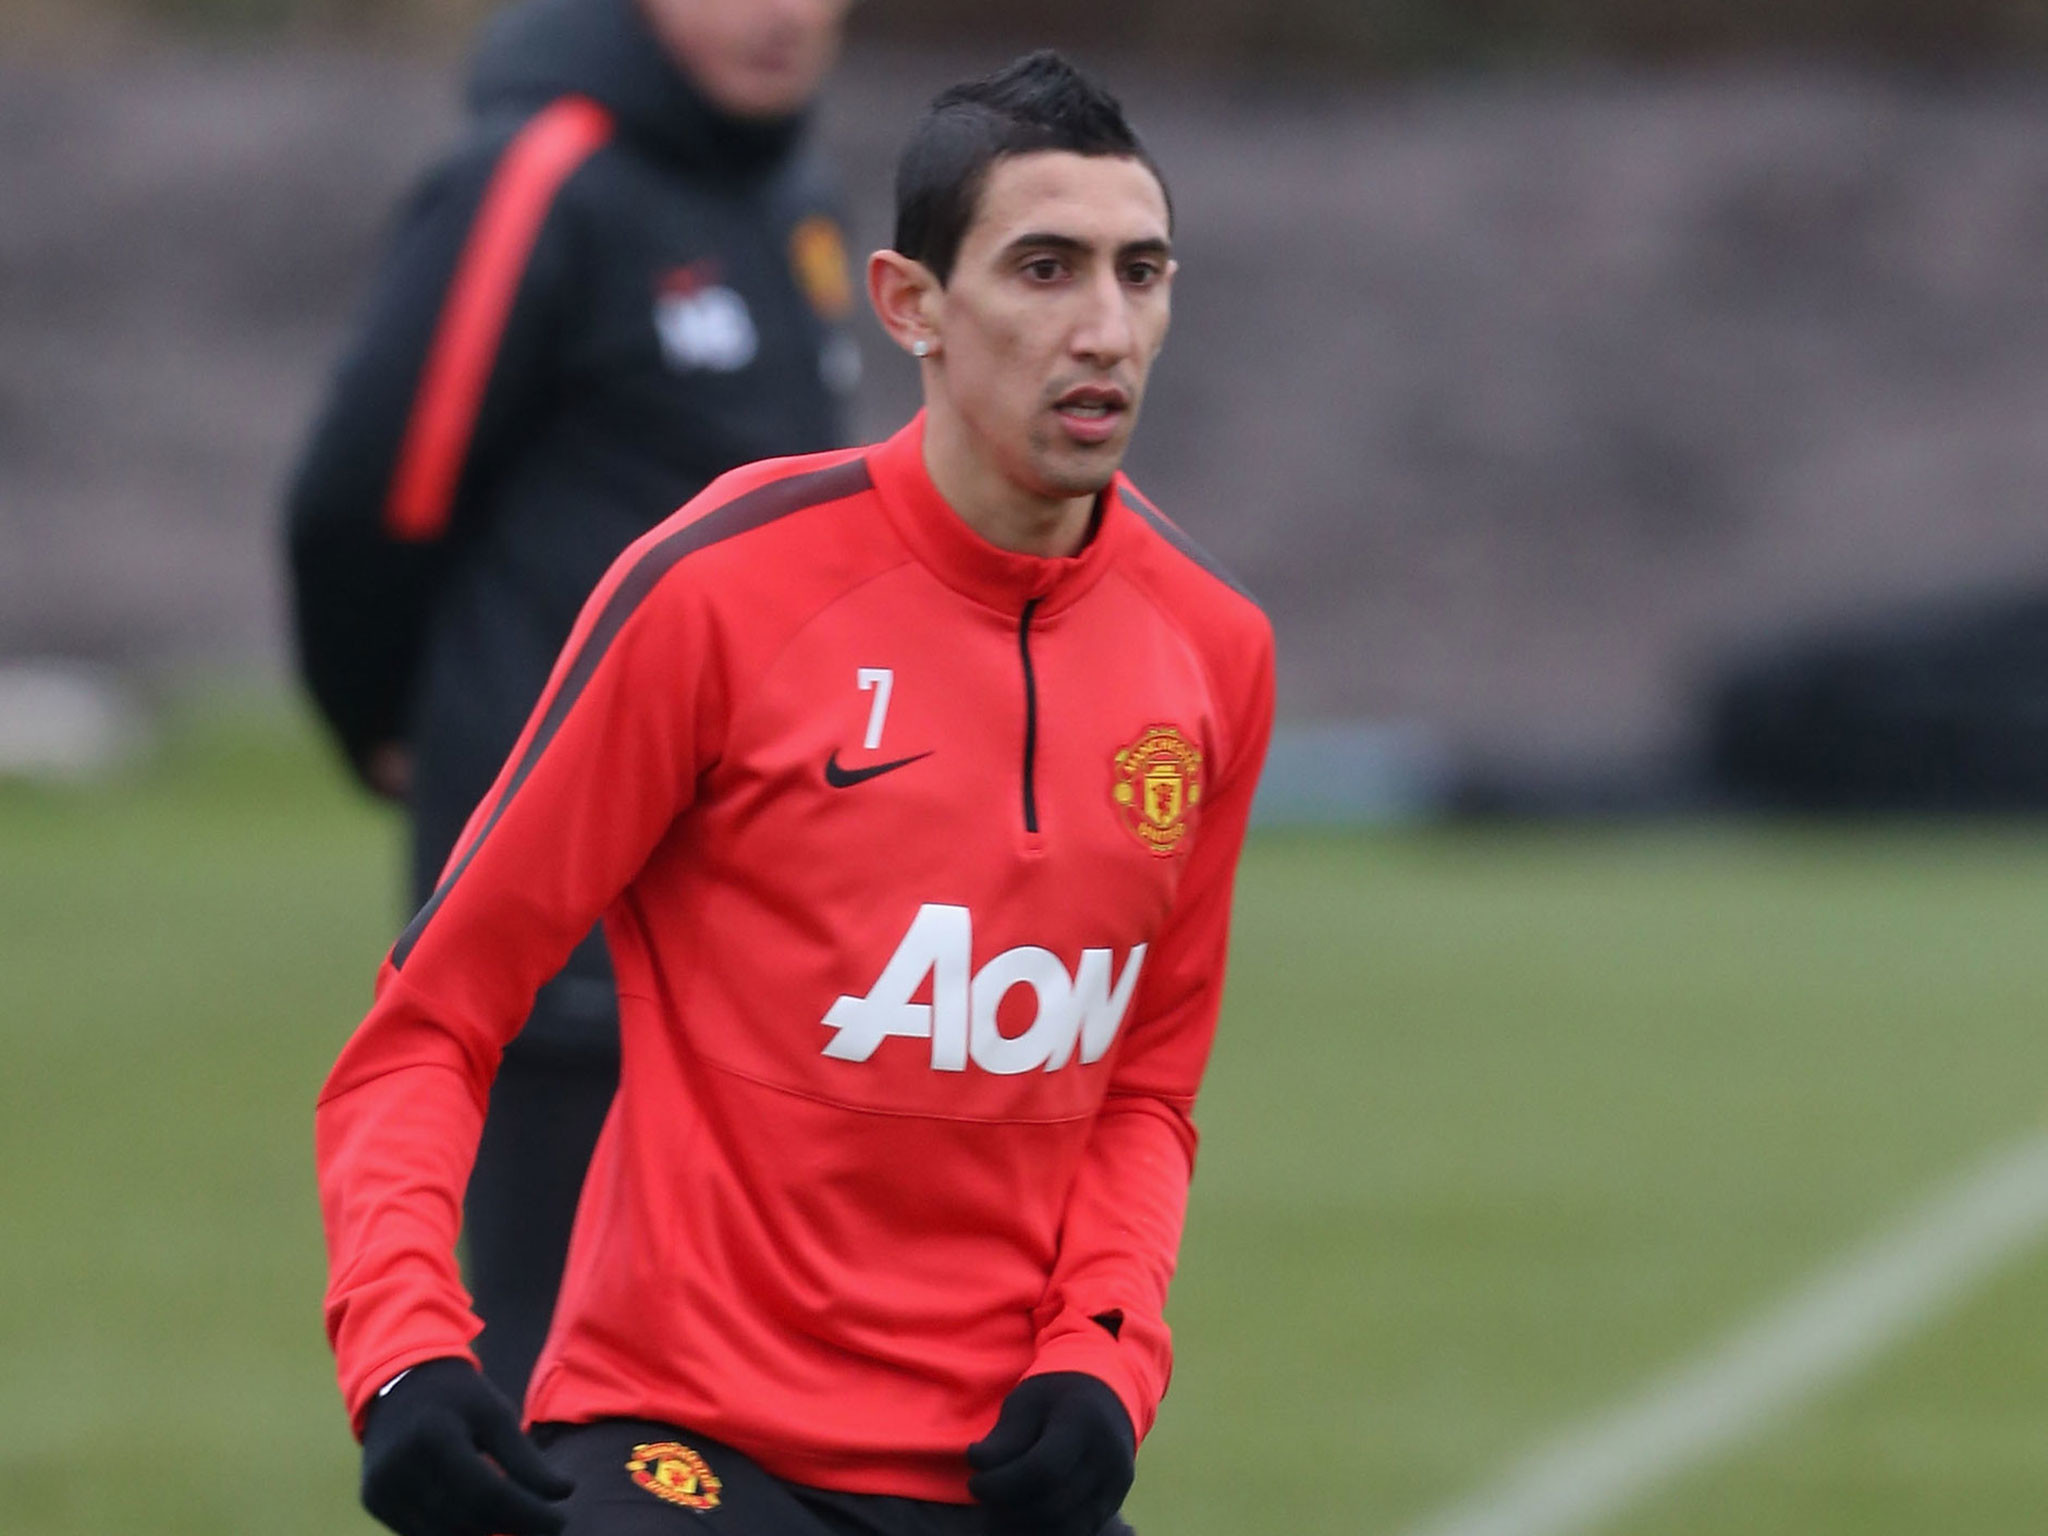 2048x1536 Manchester United injury list: Angel Di Maria expected to return against  Stoke City, but Marcos Rojo and Marouane Fellaini out | The Independent